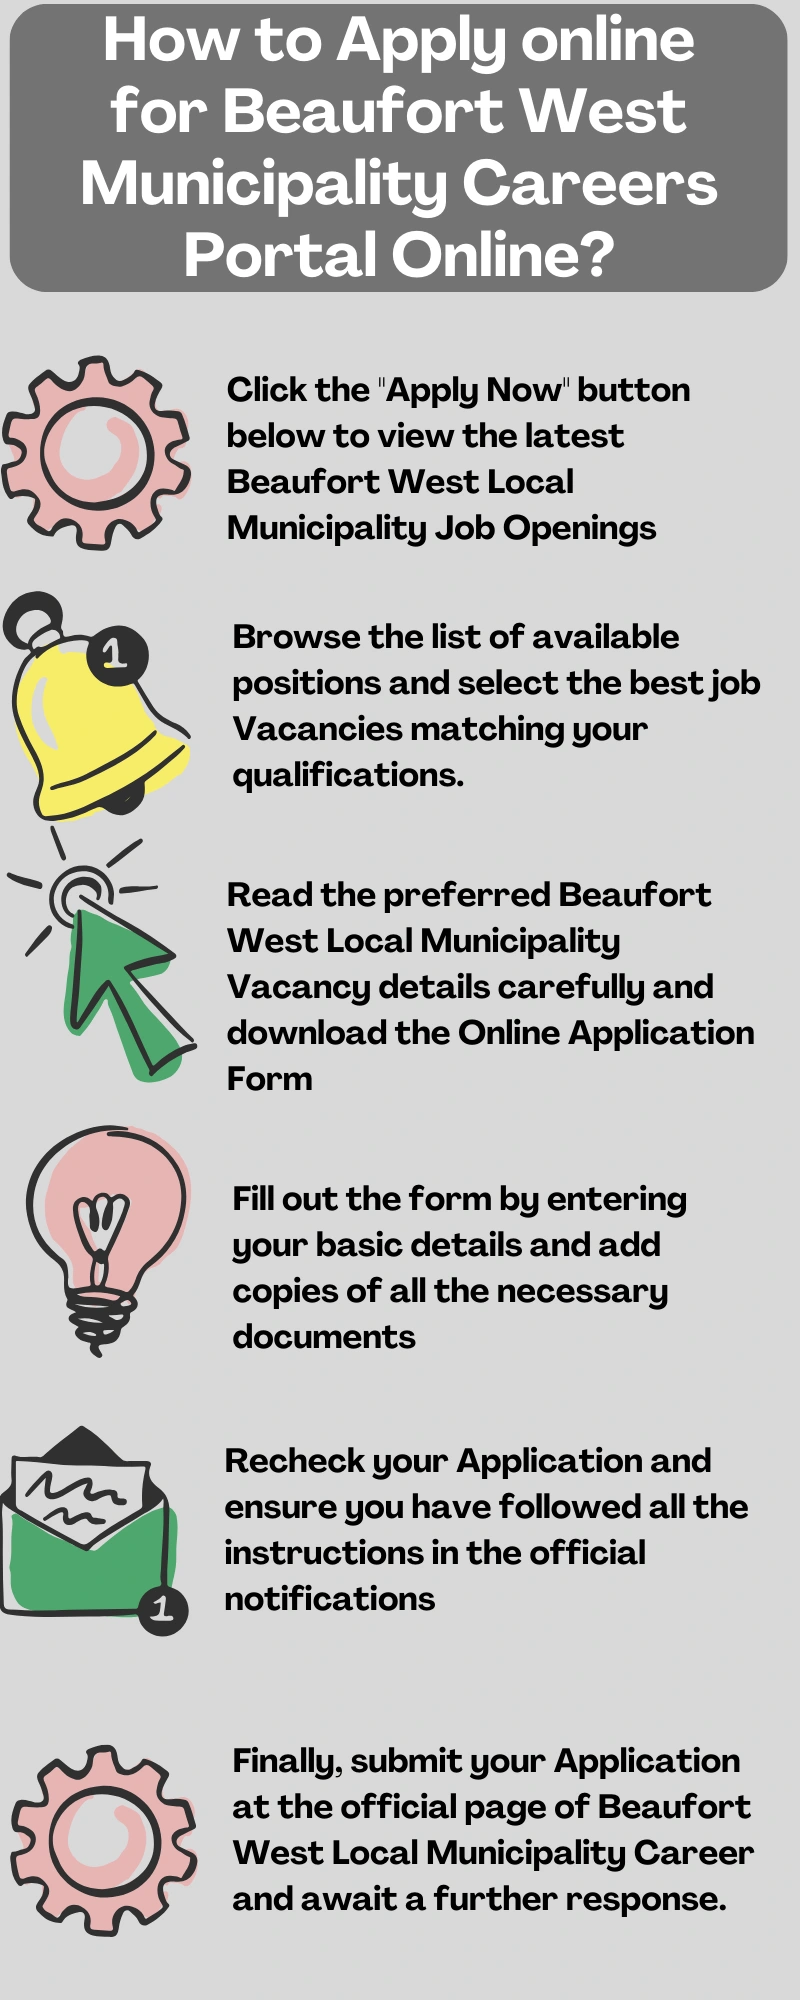 How to Apply online for Beaufort West Municipality Careers Portal Online?